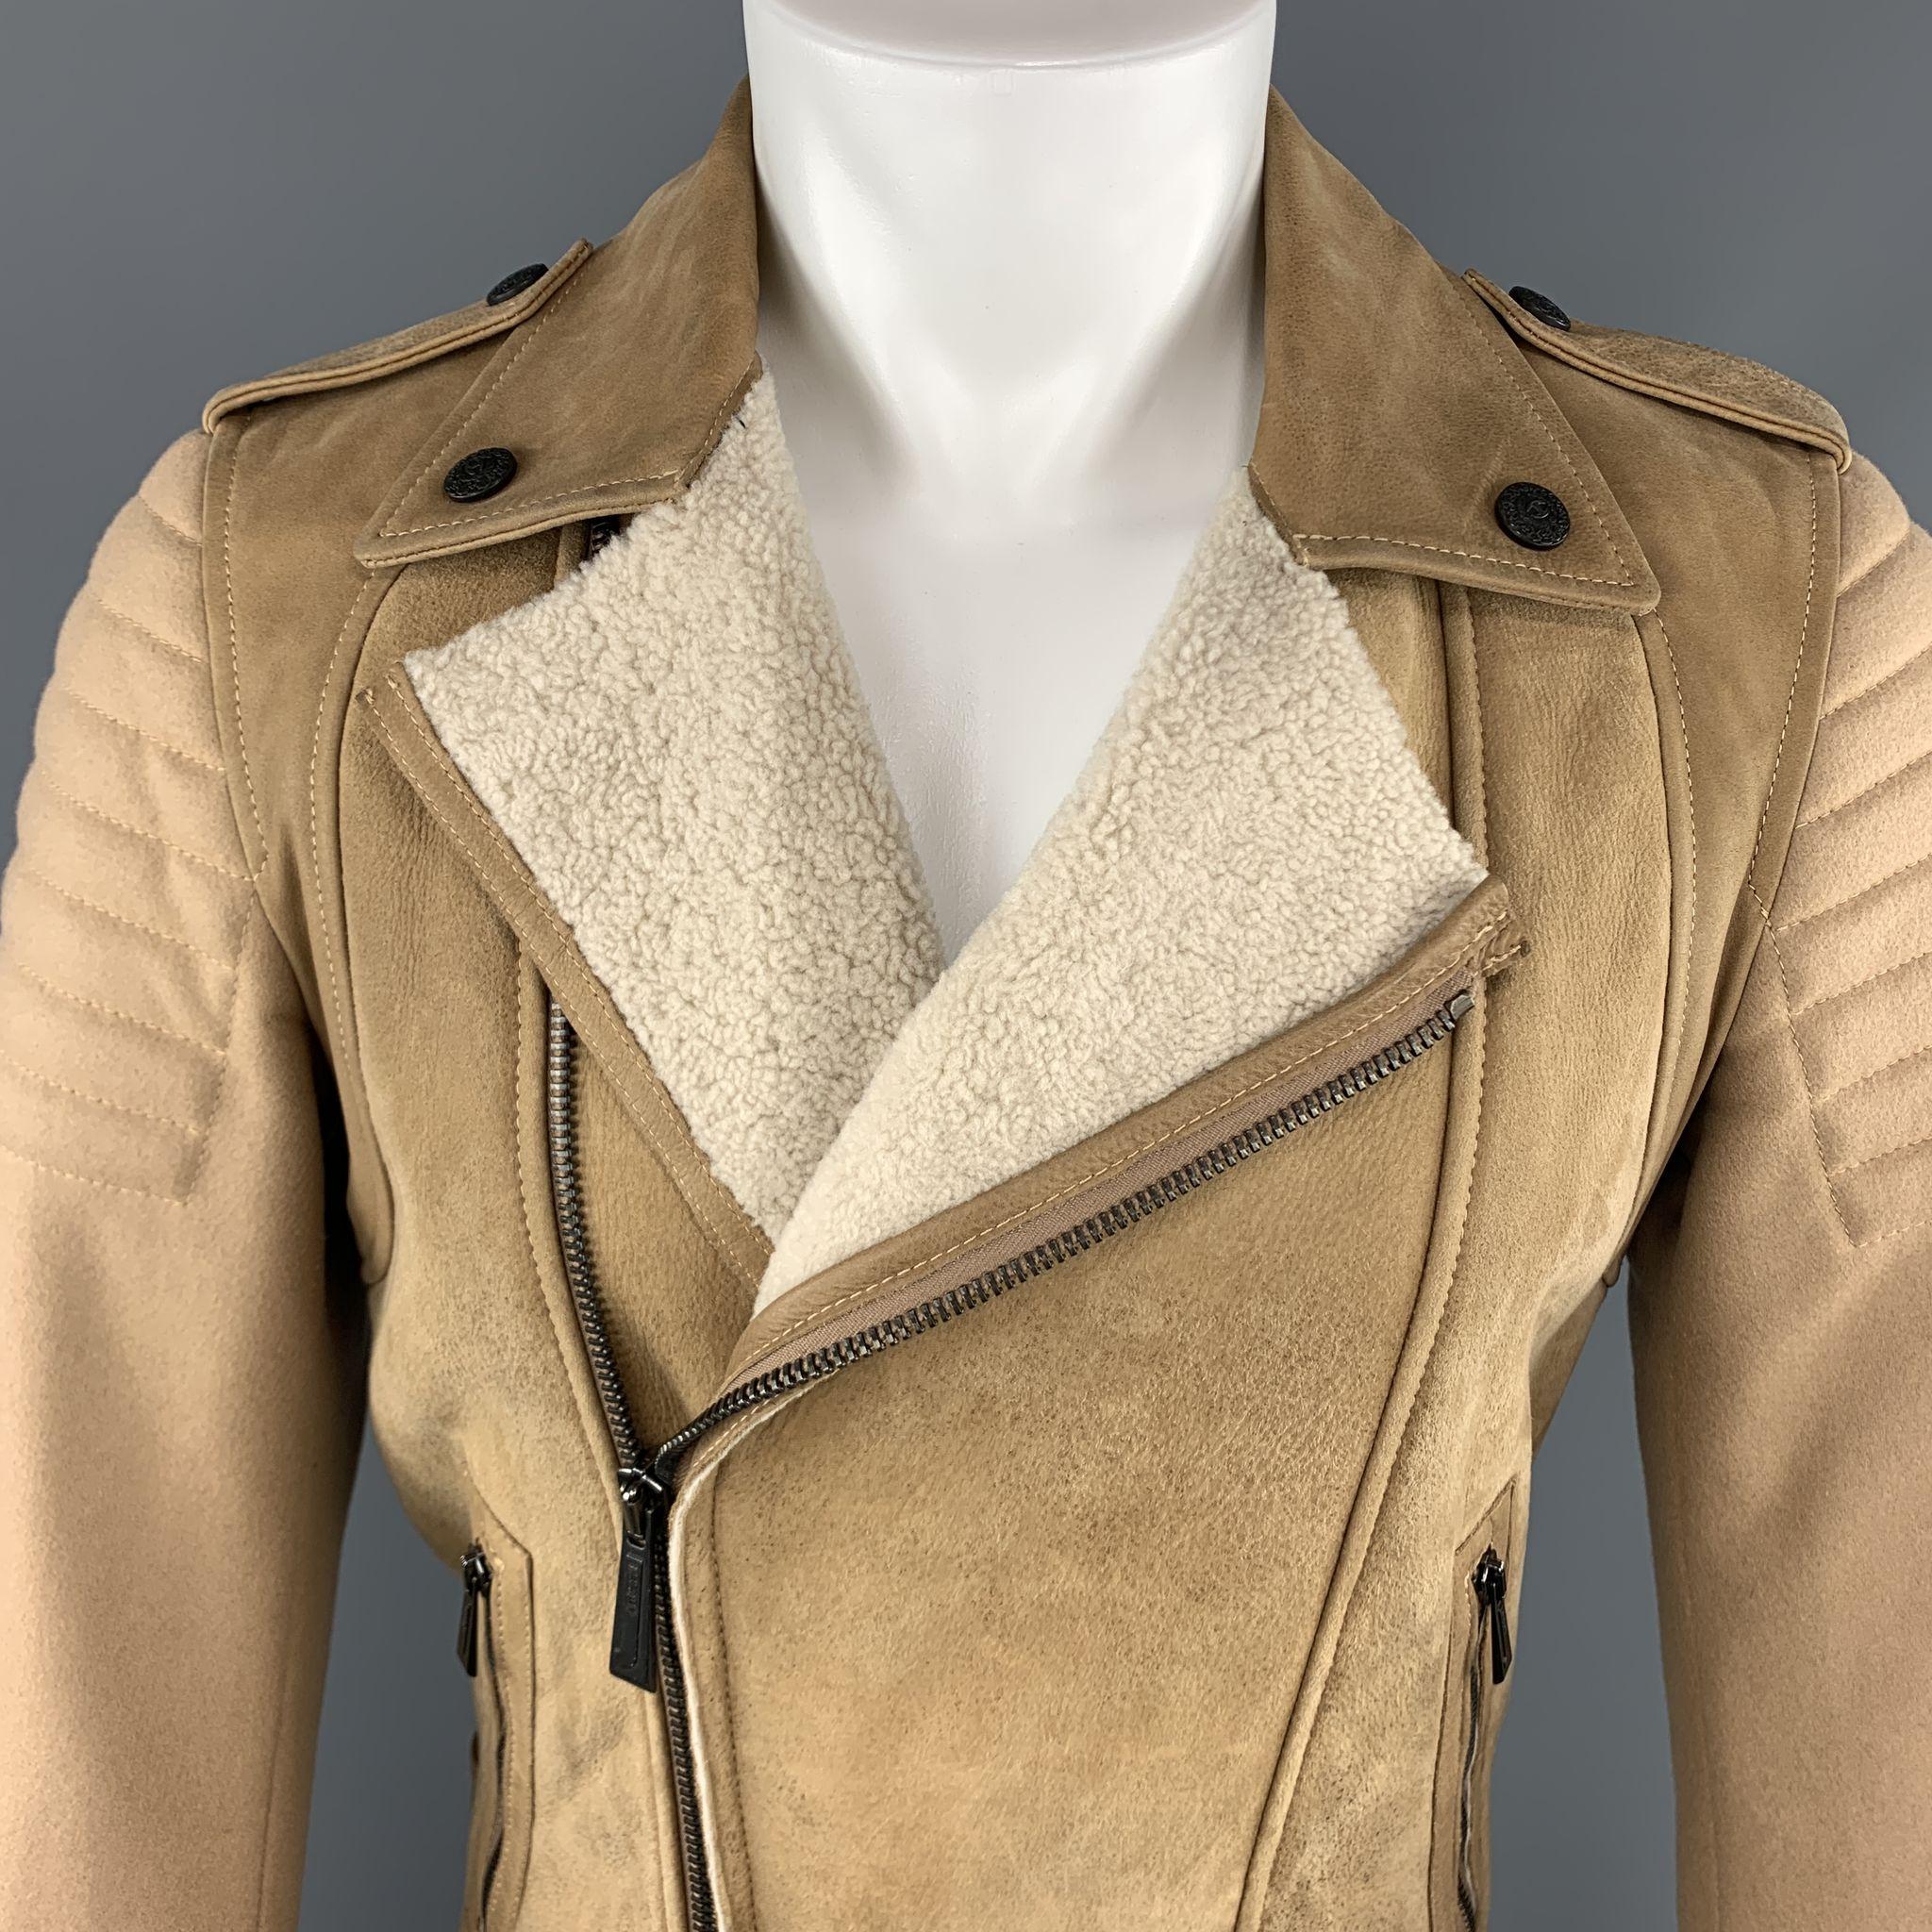 

JUST CAVALLI by ROBERTO CAVALLI biker jacket comes in tan textured shearling leather with an asymmetrical zip closure,  fur lapel, epaulets, slanted zip pockets, and camel wool padded sleeves and back panel. 

Excellent Pre-Owned